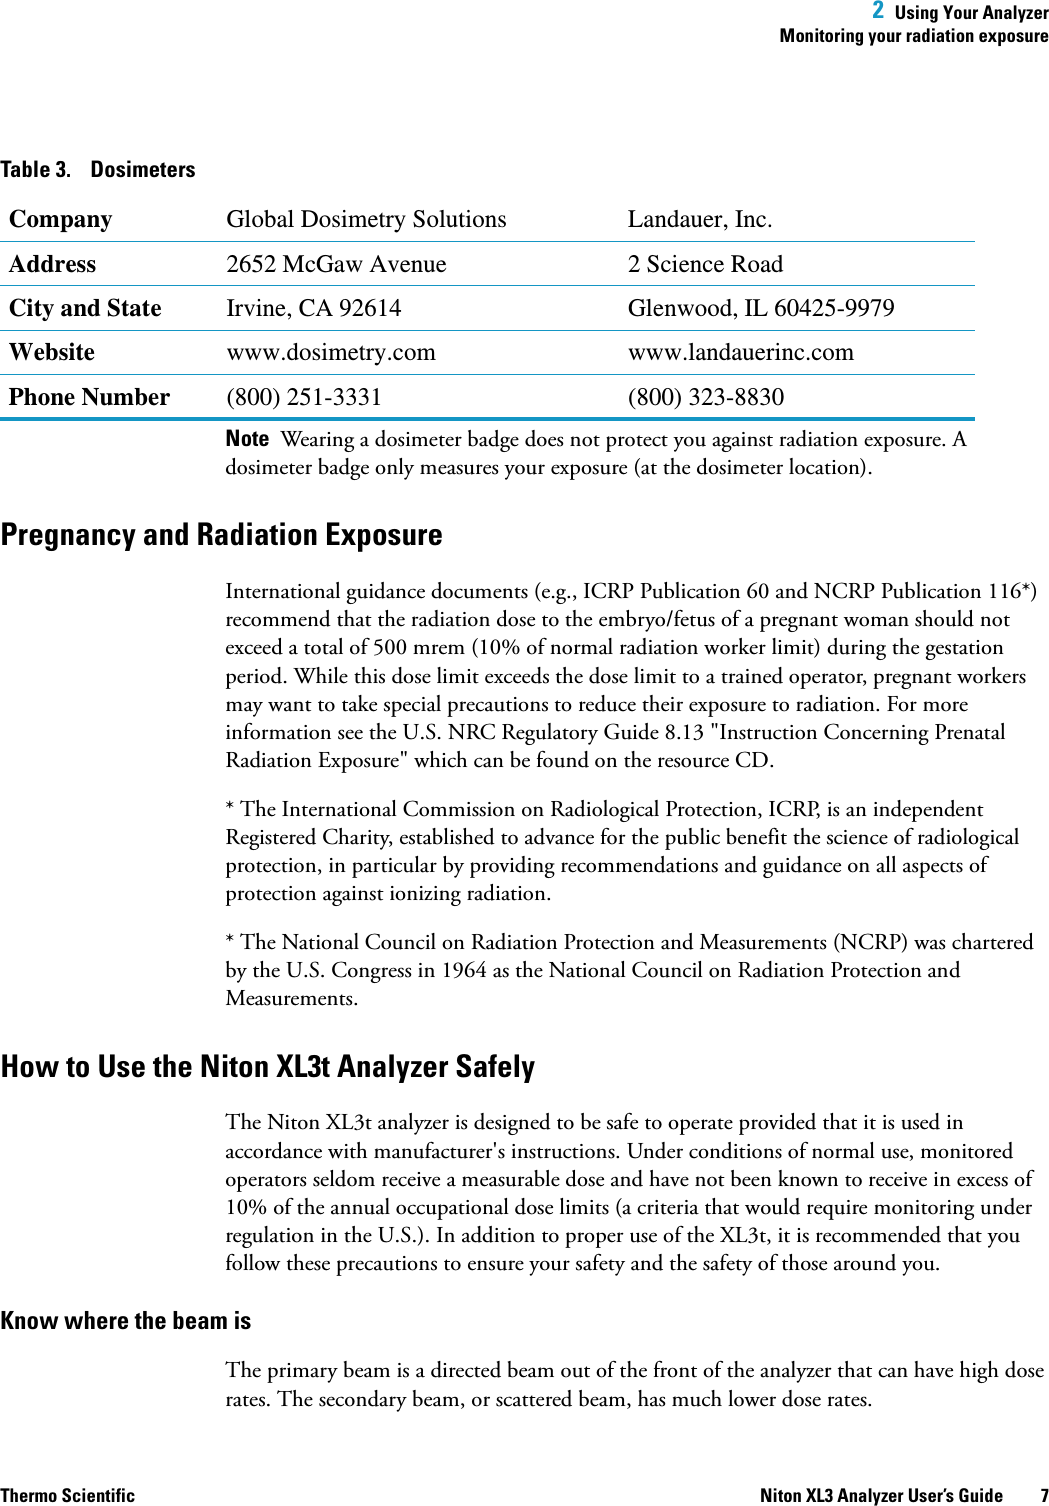  2  Using Your AnalyzerMonitoring your radiation exposureThermo Scientific Niton XL3 Analyzer User’s Guide 7Note  Wearing a dosimeter badge does not protect you against radiation exposure. A dosimeter badge only measures your exposure (at the dosimeter location).Pregnancy and Radiation ExposureInternational guidance documents (e.g., ICRP Publication 60 and NCRP Publication 116*) recommend that the radiation dose to the embryo/fetus of a pregnant woman should not exceed a total of 500 mrem (10% of normal radiation worker limit) during the gestation period. While this dose limit exceeds the dose limit to a trained operator, pregnant workers may want to take special precautions to reduce their exposure to radiation. For more information see the U.S. NRC Regulatory Guide 8.13 &quot;Instruction Concerning Prenatal Radiation Exposure&quot; which can be found on the resource CD.* The International Commission on Radiological Protection, ICRP, is an independent Registered Charity, established to advance for the public benefit the science of radiological protection, in particular by providing recommendations and guidance on all aspects of protection against ionizing radiation.* The National Council on Radiation Protection and Measurements (NCRP) was chartered by the U.S. Congress in 1964 as the National Council on Radiation Protection and Measurements.How to Use the Niton XL3t Analyzer SafelyThe Niton XL3t analyzer is designed to be safe to operate provided that it is used in accordance with manufacturer&apos;s instructions. Under conditions of normal use, monitored operators seldom receive a measurable dose and have not been known to receive in excess of 10% of the annual occupational dose limits (a criteria that would require monitoring under regulation in the U.S.). In addition to proper use of the XL3t, it is recommended that you follow these precautions to ensure your safety and the safety of those around you.Know where the beam isThe primary beam is a directed beam out of the front of the analyzer that can have high dose rates. The secondary beam, or scattered beam, has much lower dose rates.Table 3. DosimetersCompany Global Dosimetry Solutions Landauer, Inc.Address 2652 McGaw Avenue 2 Science RoadCity and State Irvine, CA 92614 Glenwood, IL 60425-9979Website www.dosimetry.com www.landauerinc.comPhone Number (800) 251-3331 (800) 323-8830